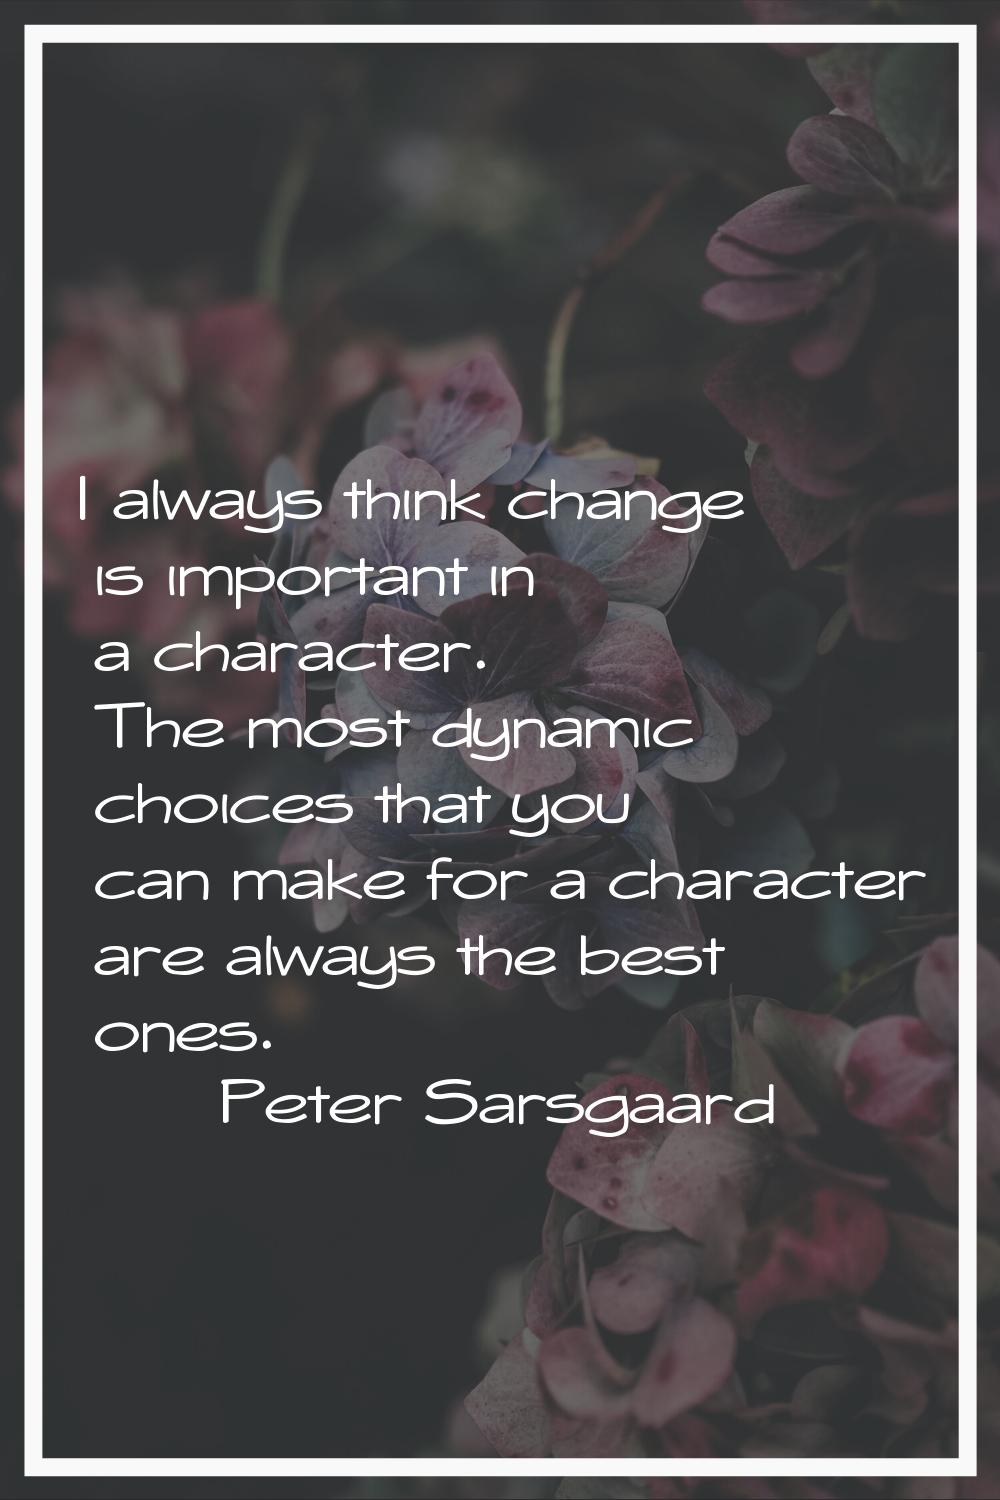 I always think change is important in a character. The most dynamic choices that you can make for a